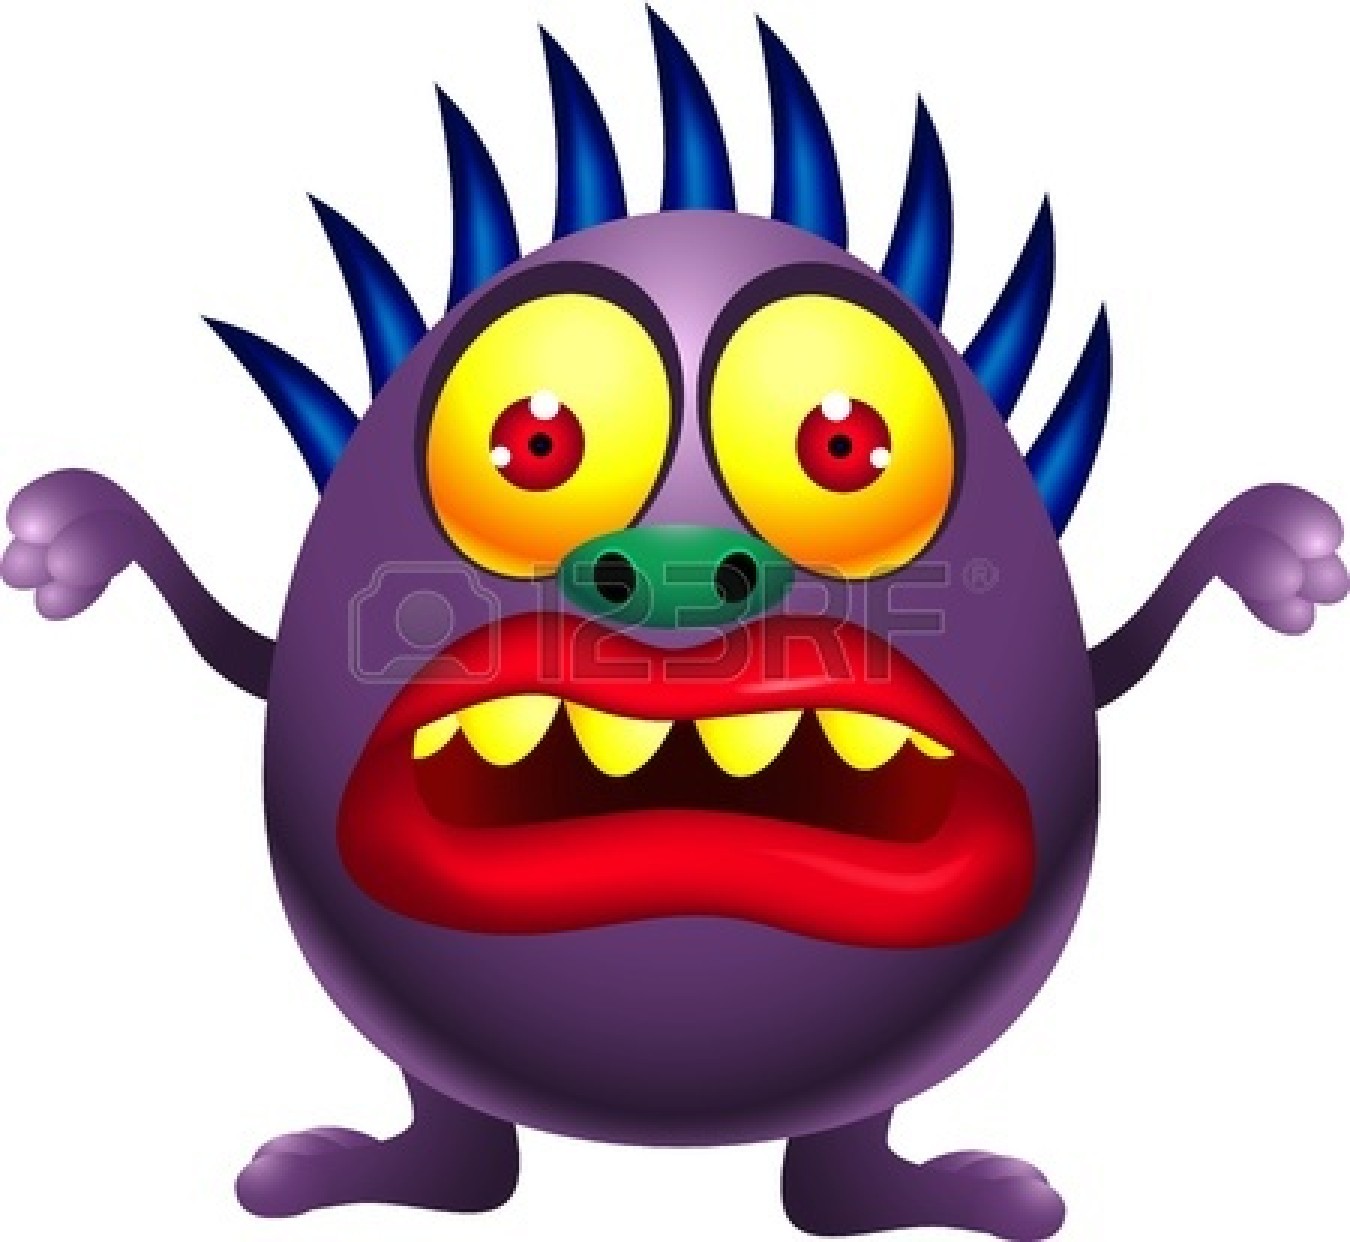 Scary Cartoon Monster   Clipart Panda   Free Clipart Images